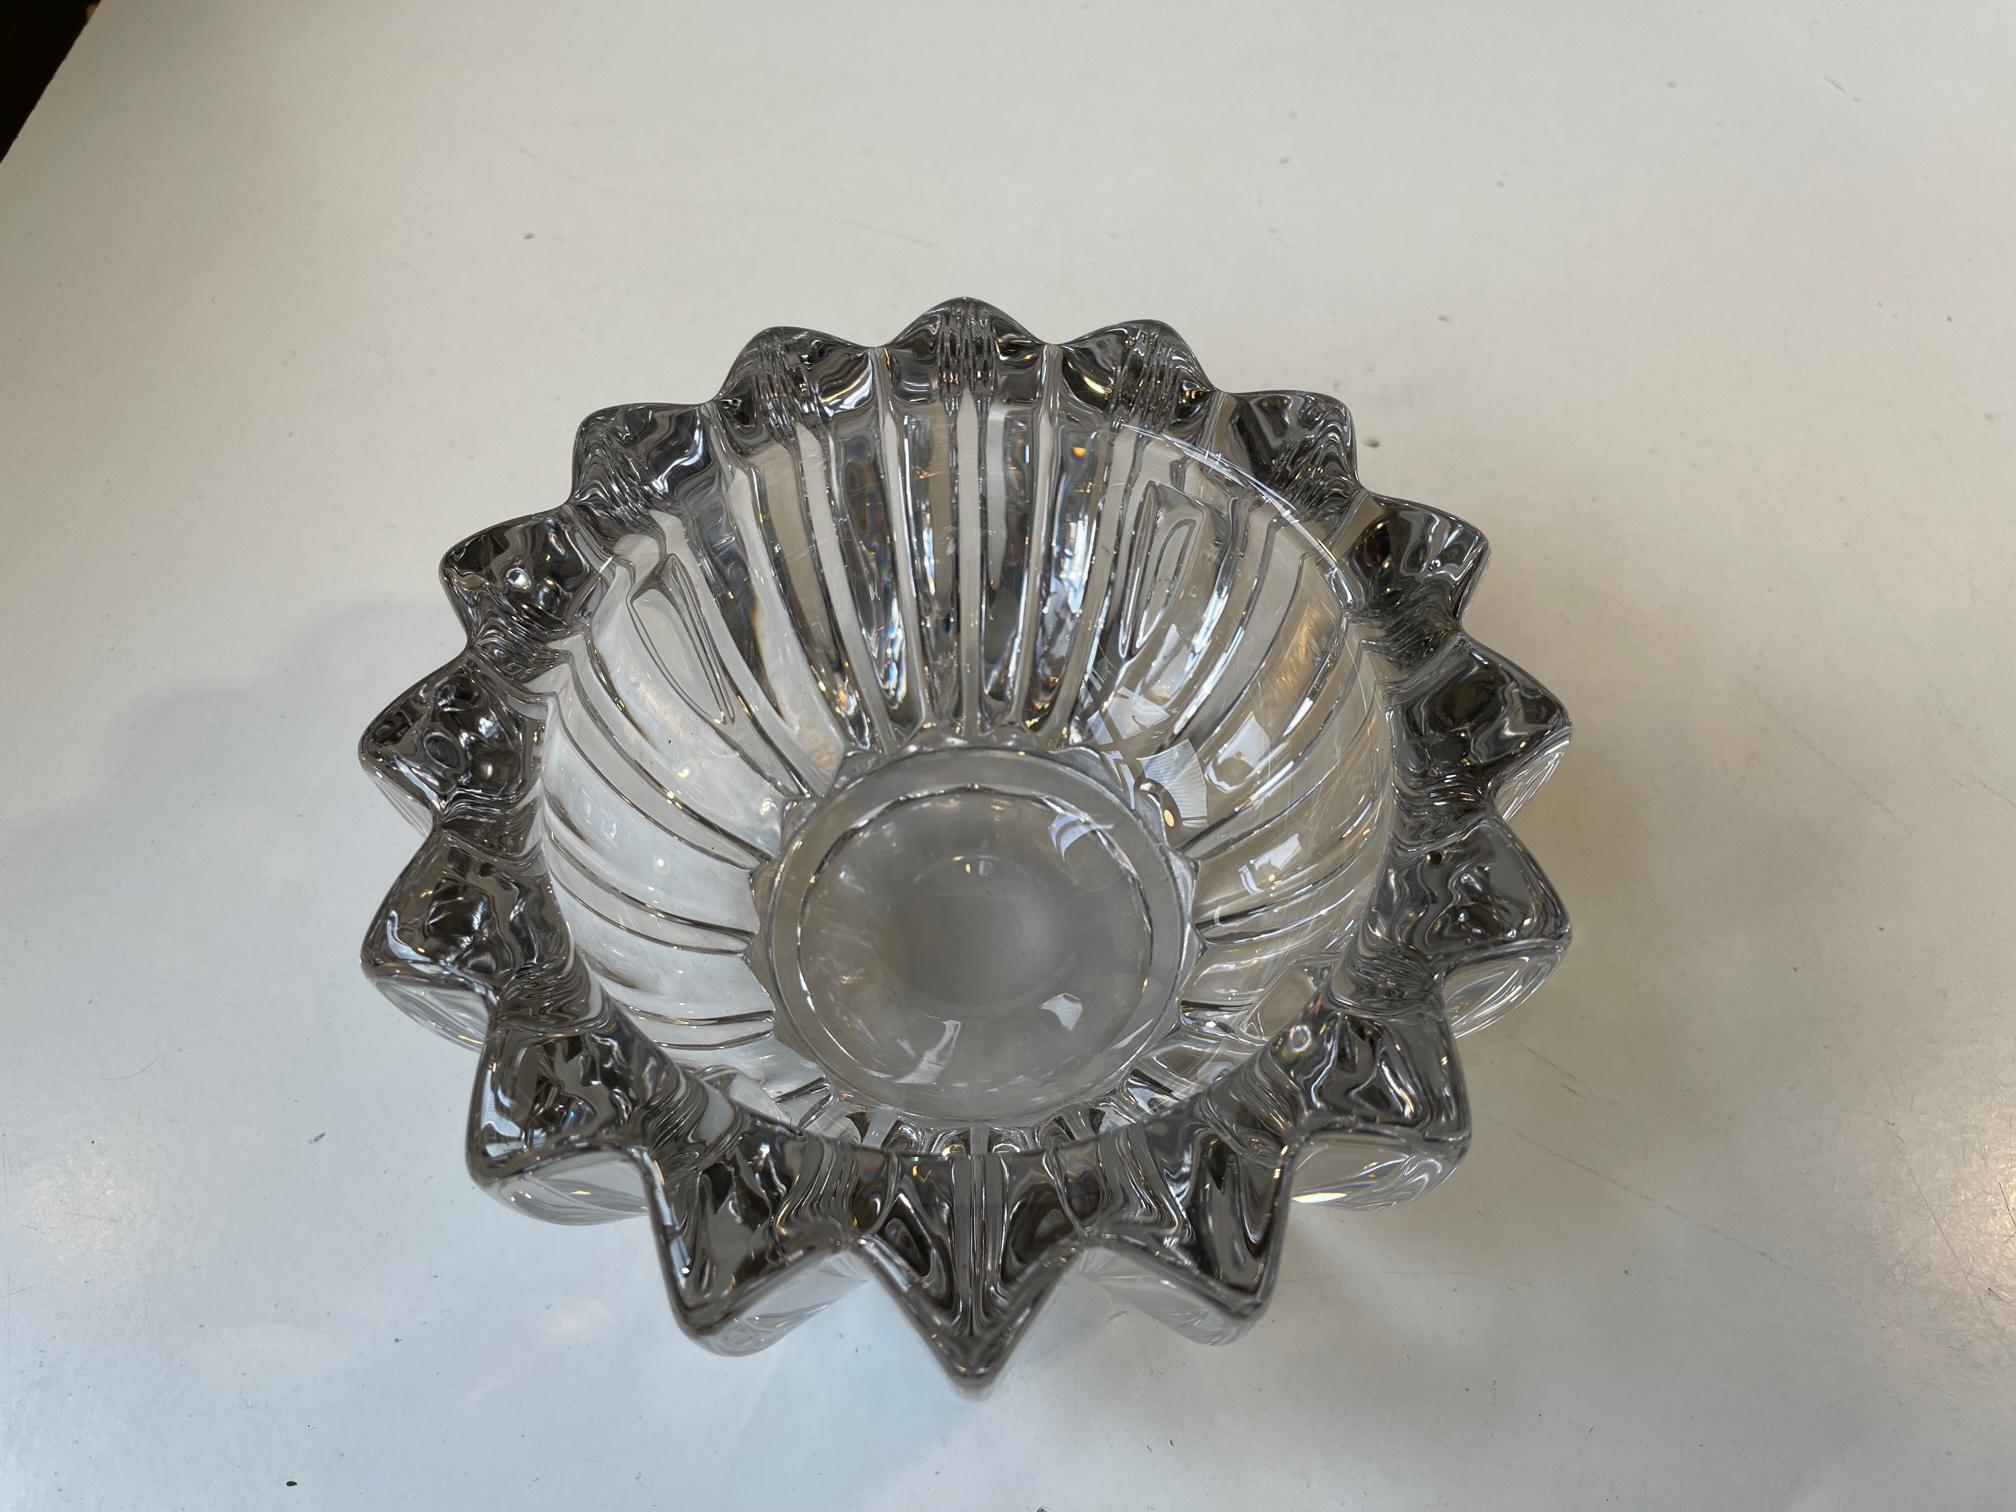 Thick star-shaped glass dish/bowl designed by Pierre D’avesn during the 1930s. Would make a great candy or chocolate bowl for Christmas. It is signed/marked by the maker to the base. Nice intact vintage condition. Measurements: H: 8.5, D: 17.5 cm.